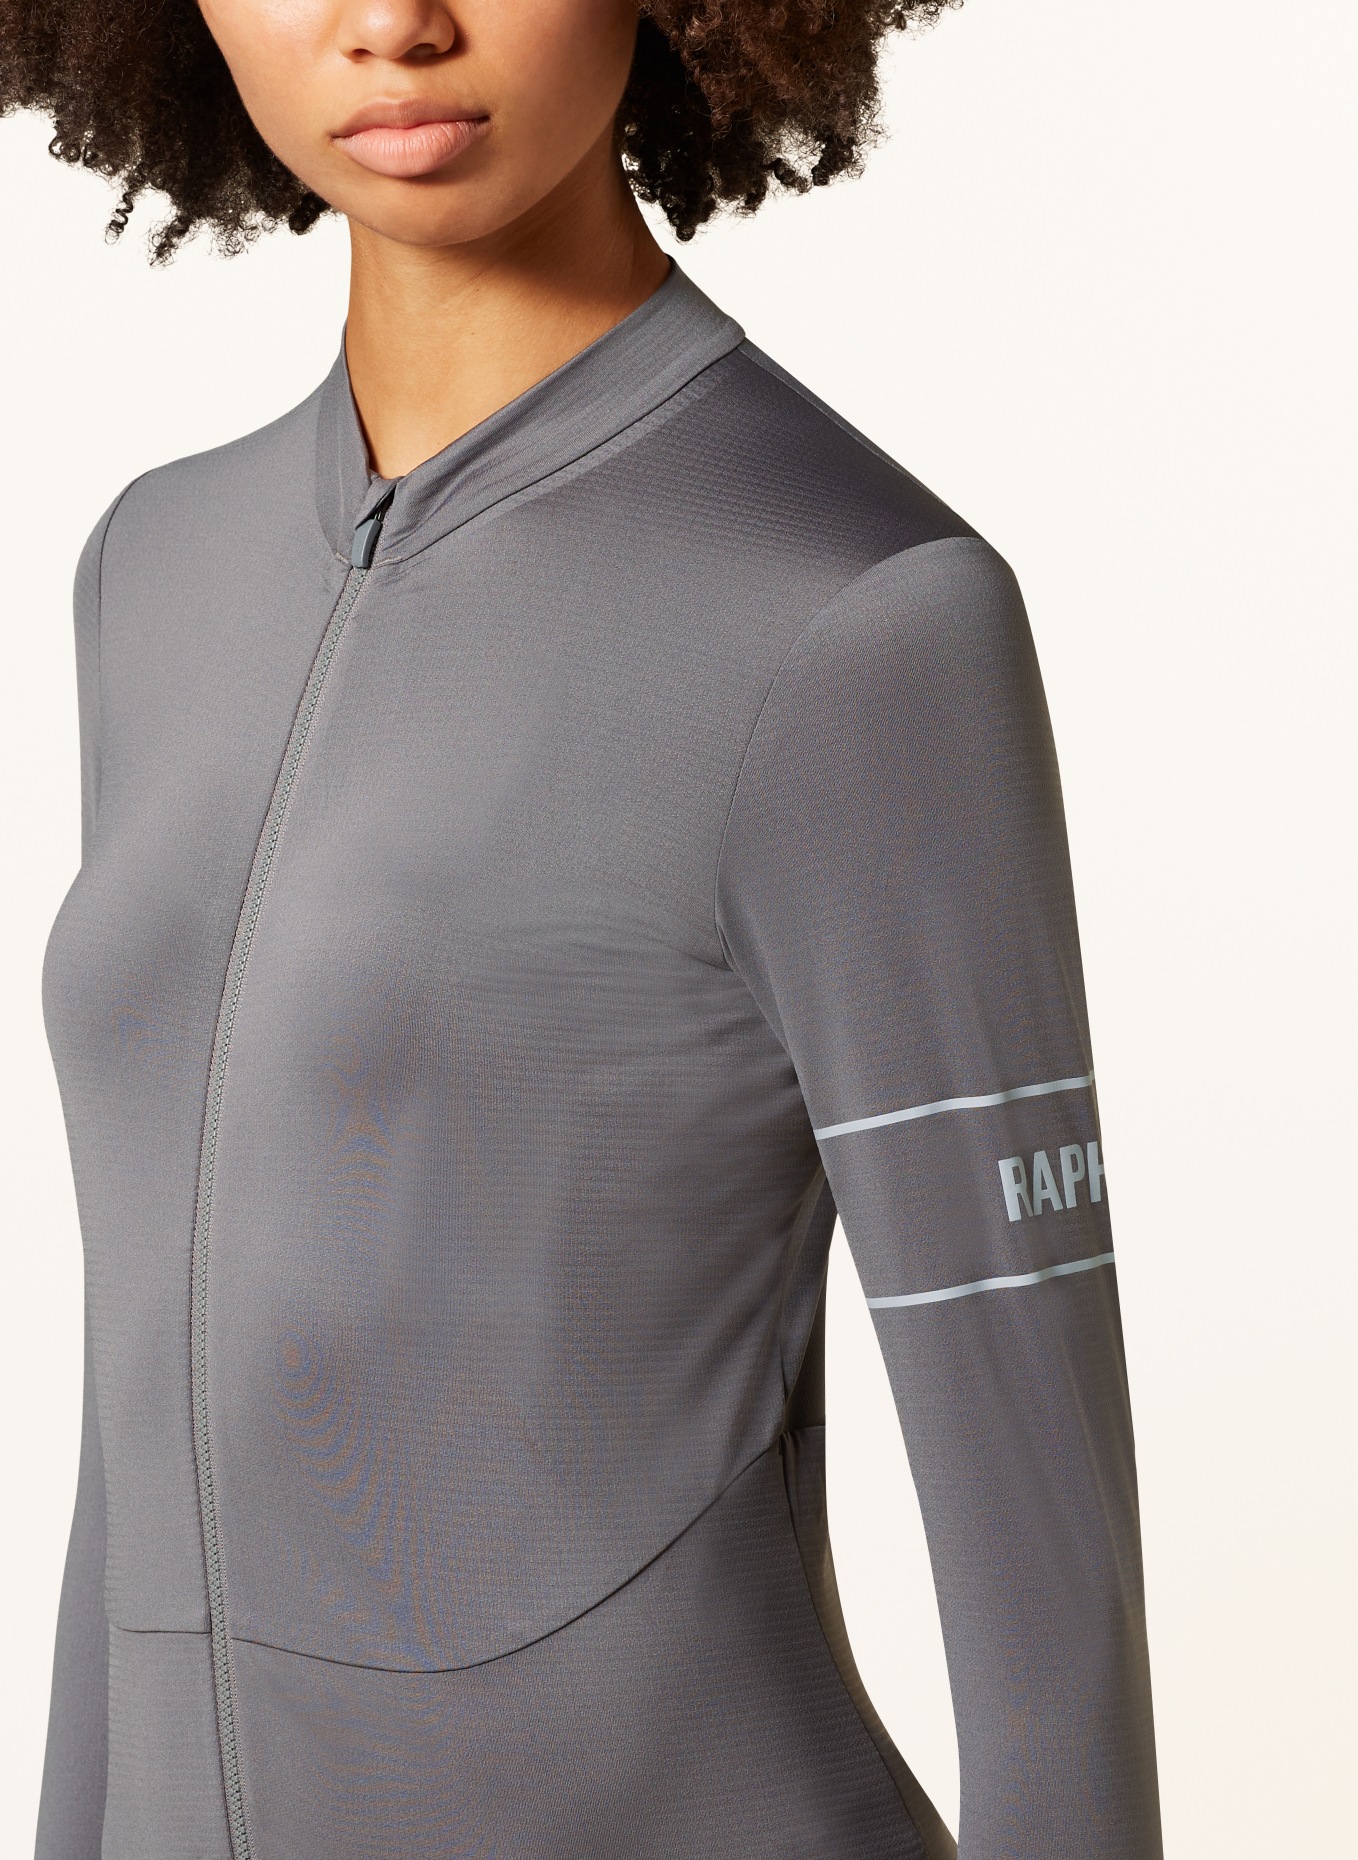 Rapha Thermal cycling jersey PRO TEAM, Color: GRAY (Image 4)